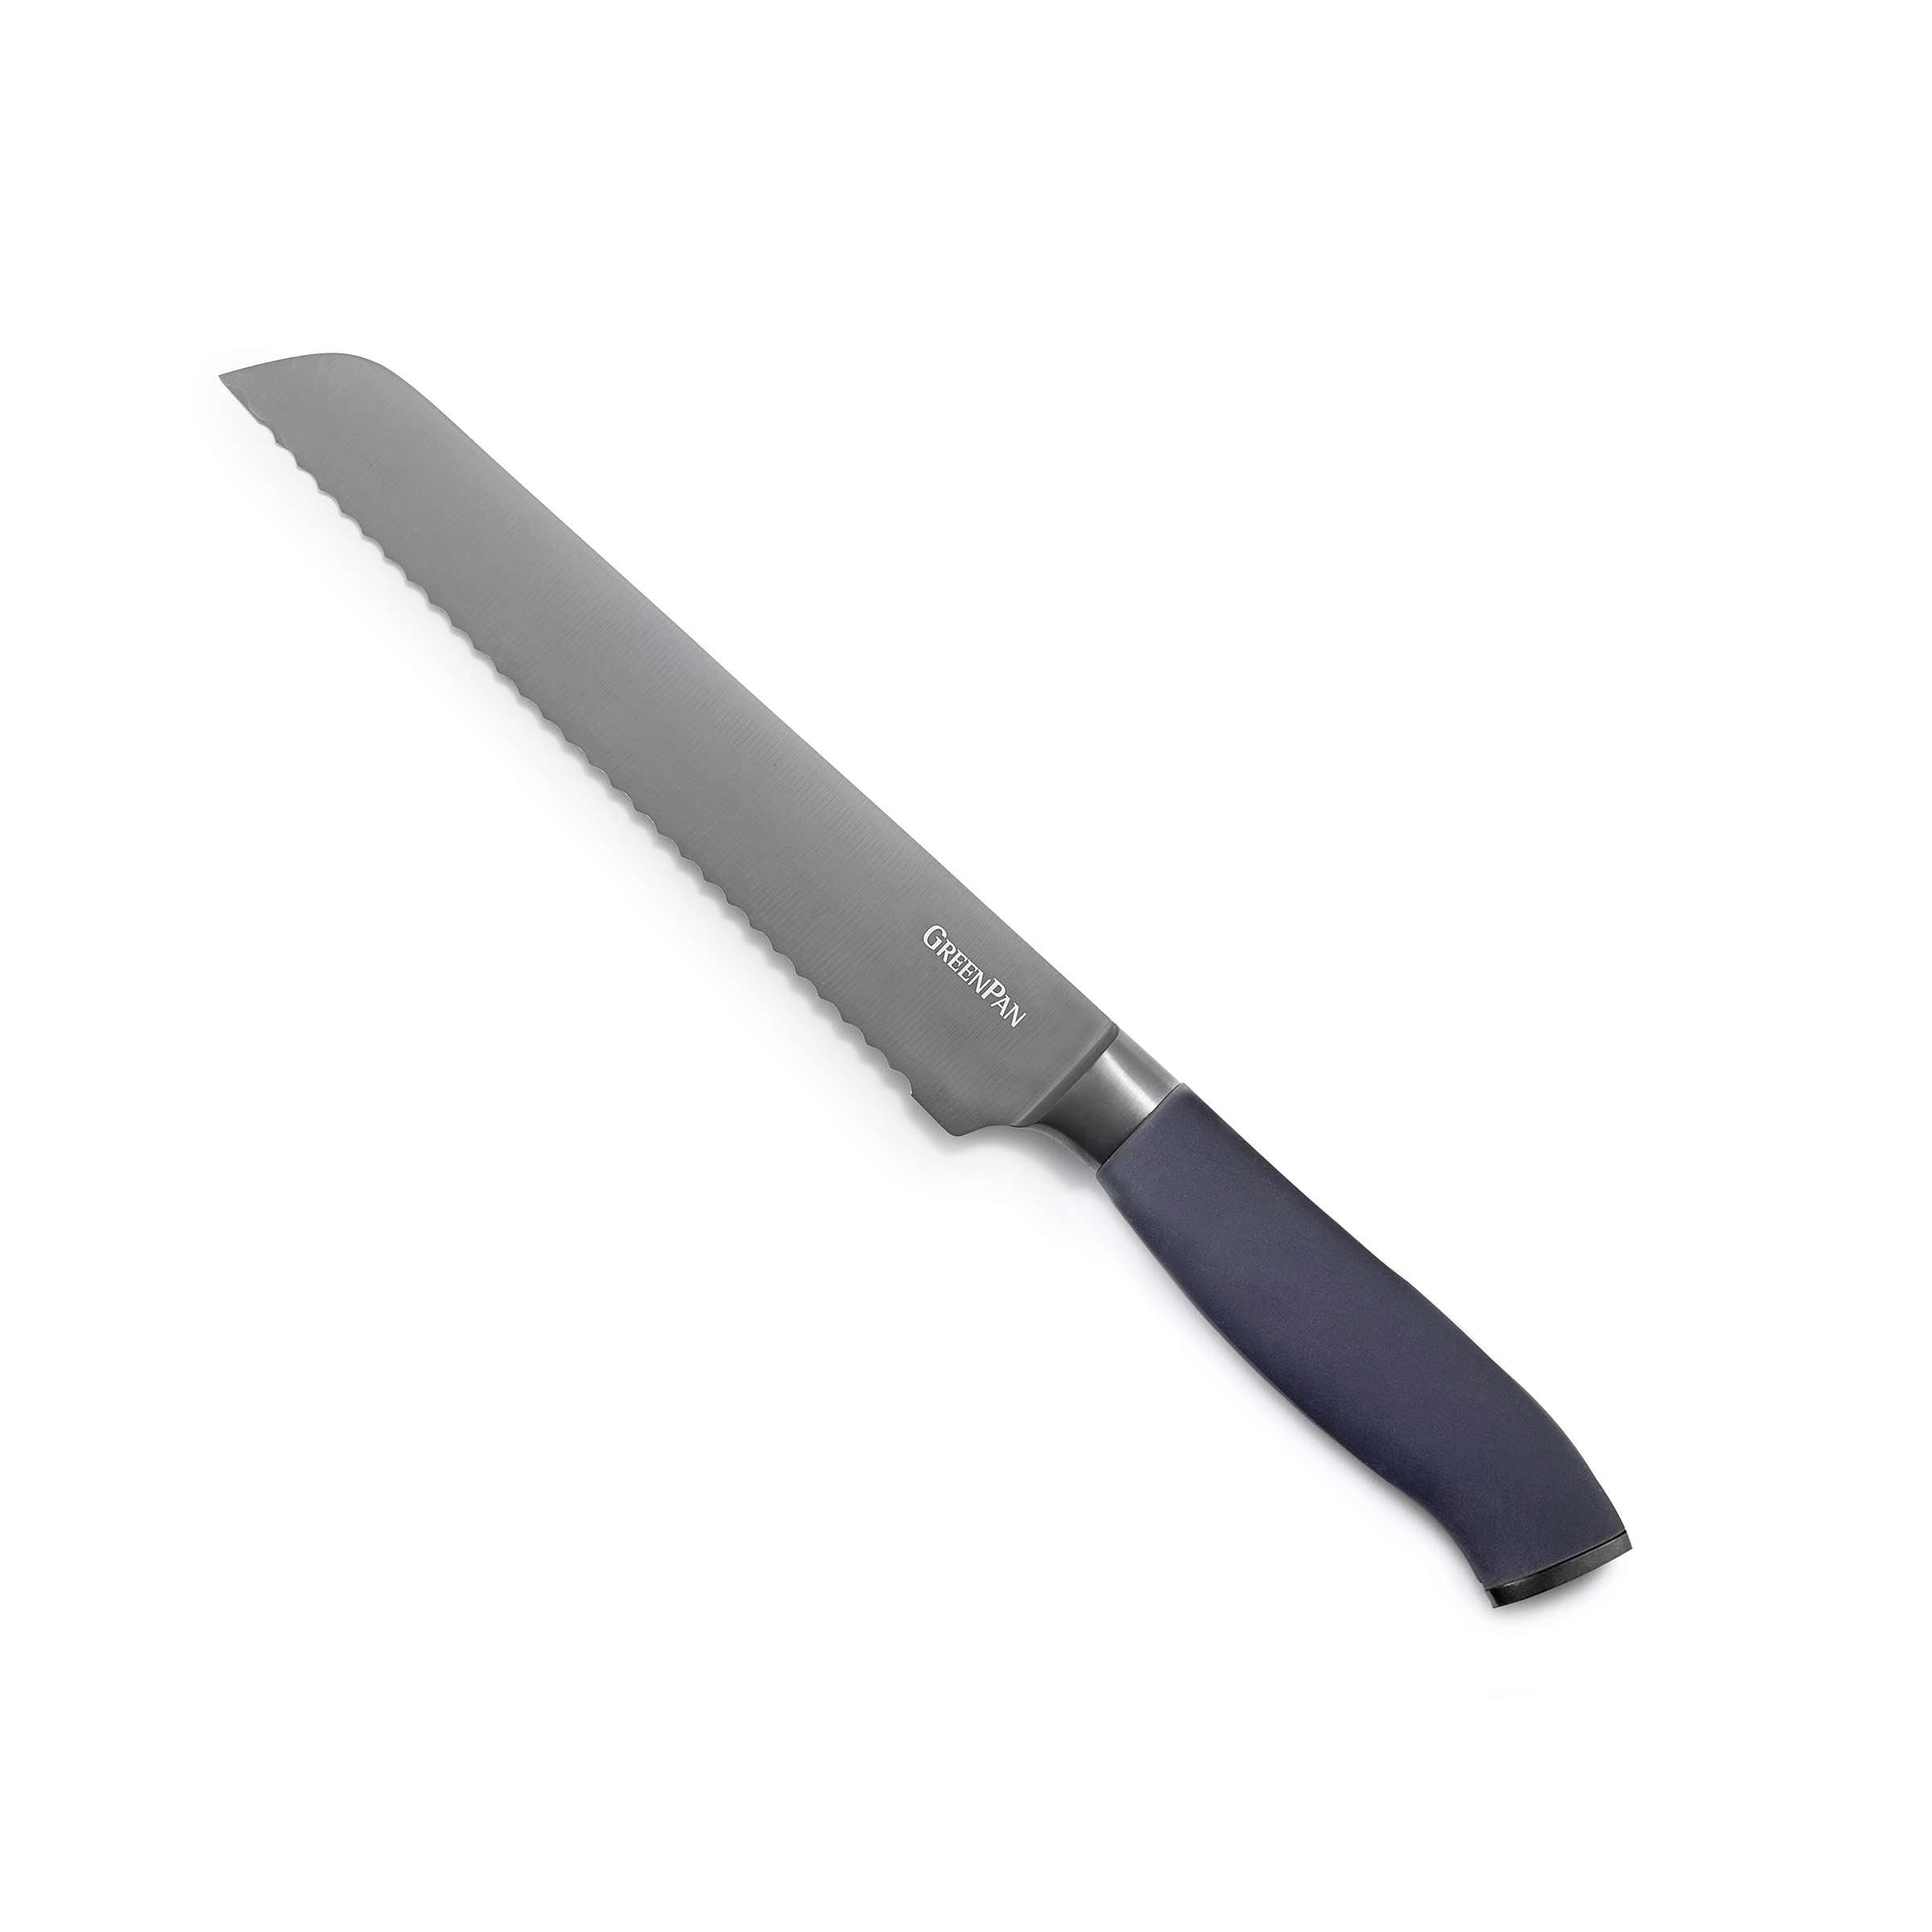 https://ak1.ostkcdn.com/images/products/is/images/direct/59be0978bf0e6d60c7718f9bb5642b530ced97c4/GreenPan-Cutlery-8%22-Bread-Knife.jpg